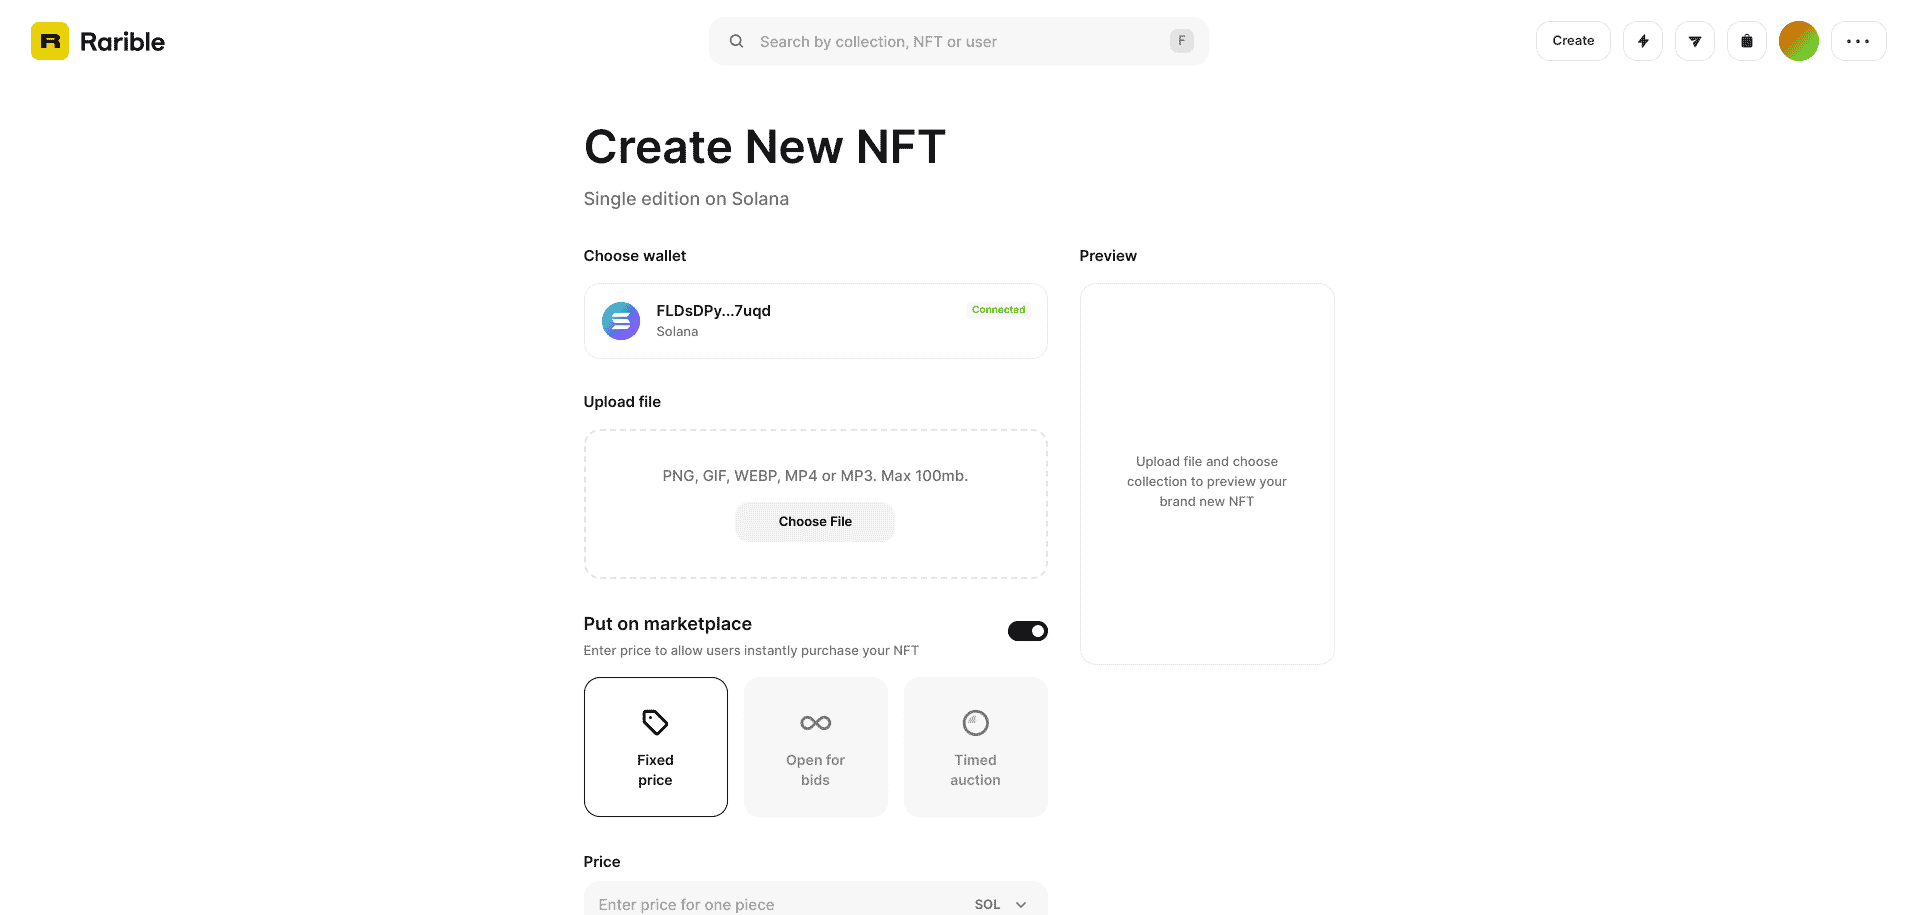 Create NFT collections in Rarible